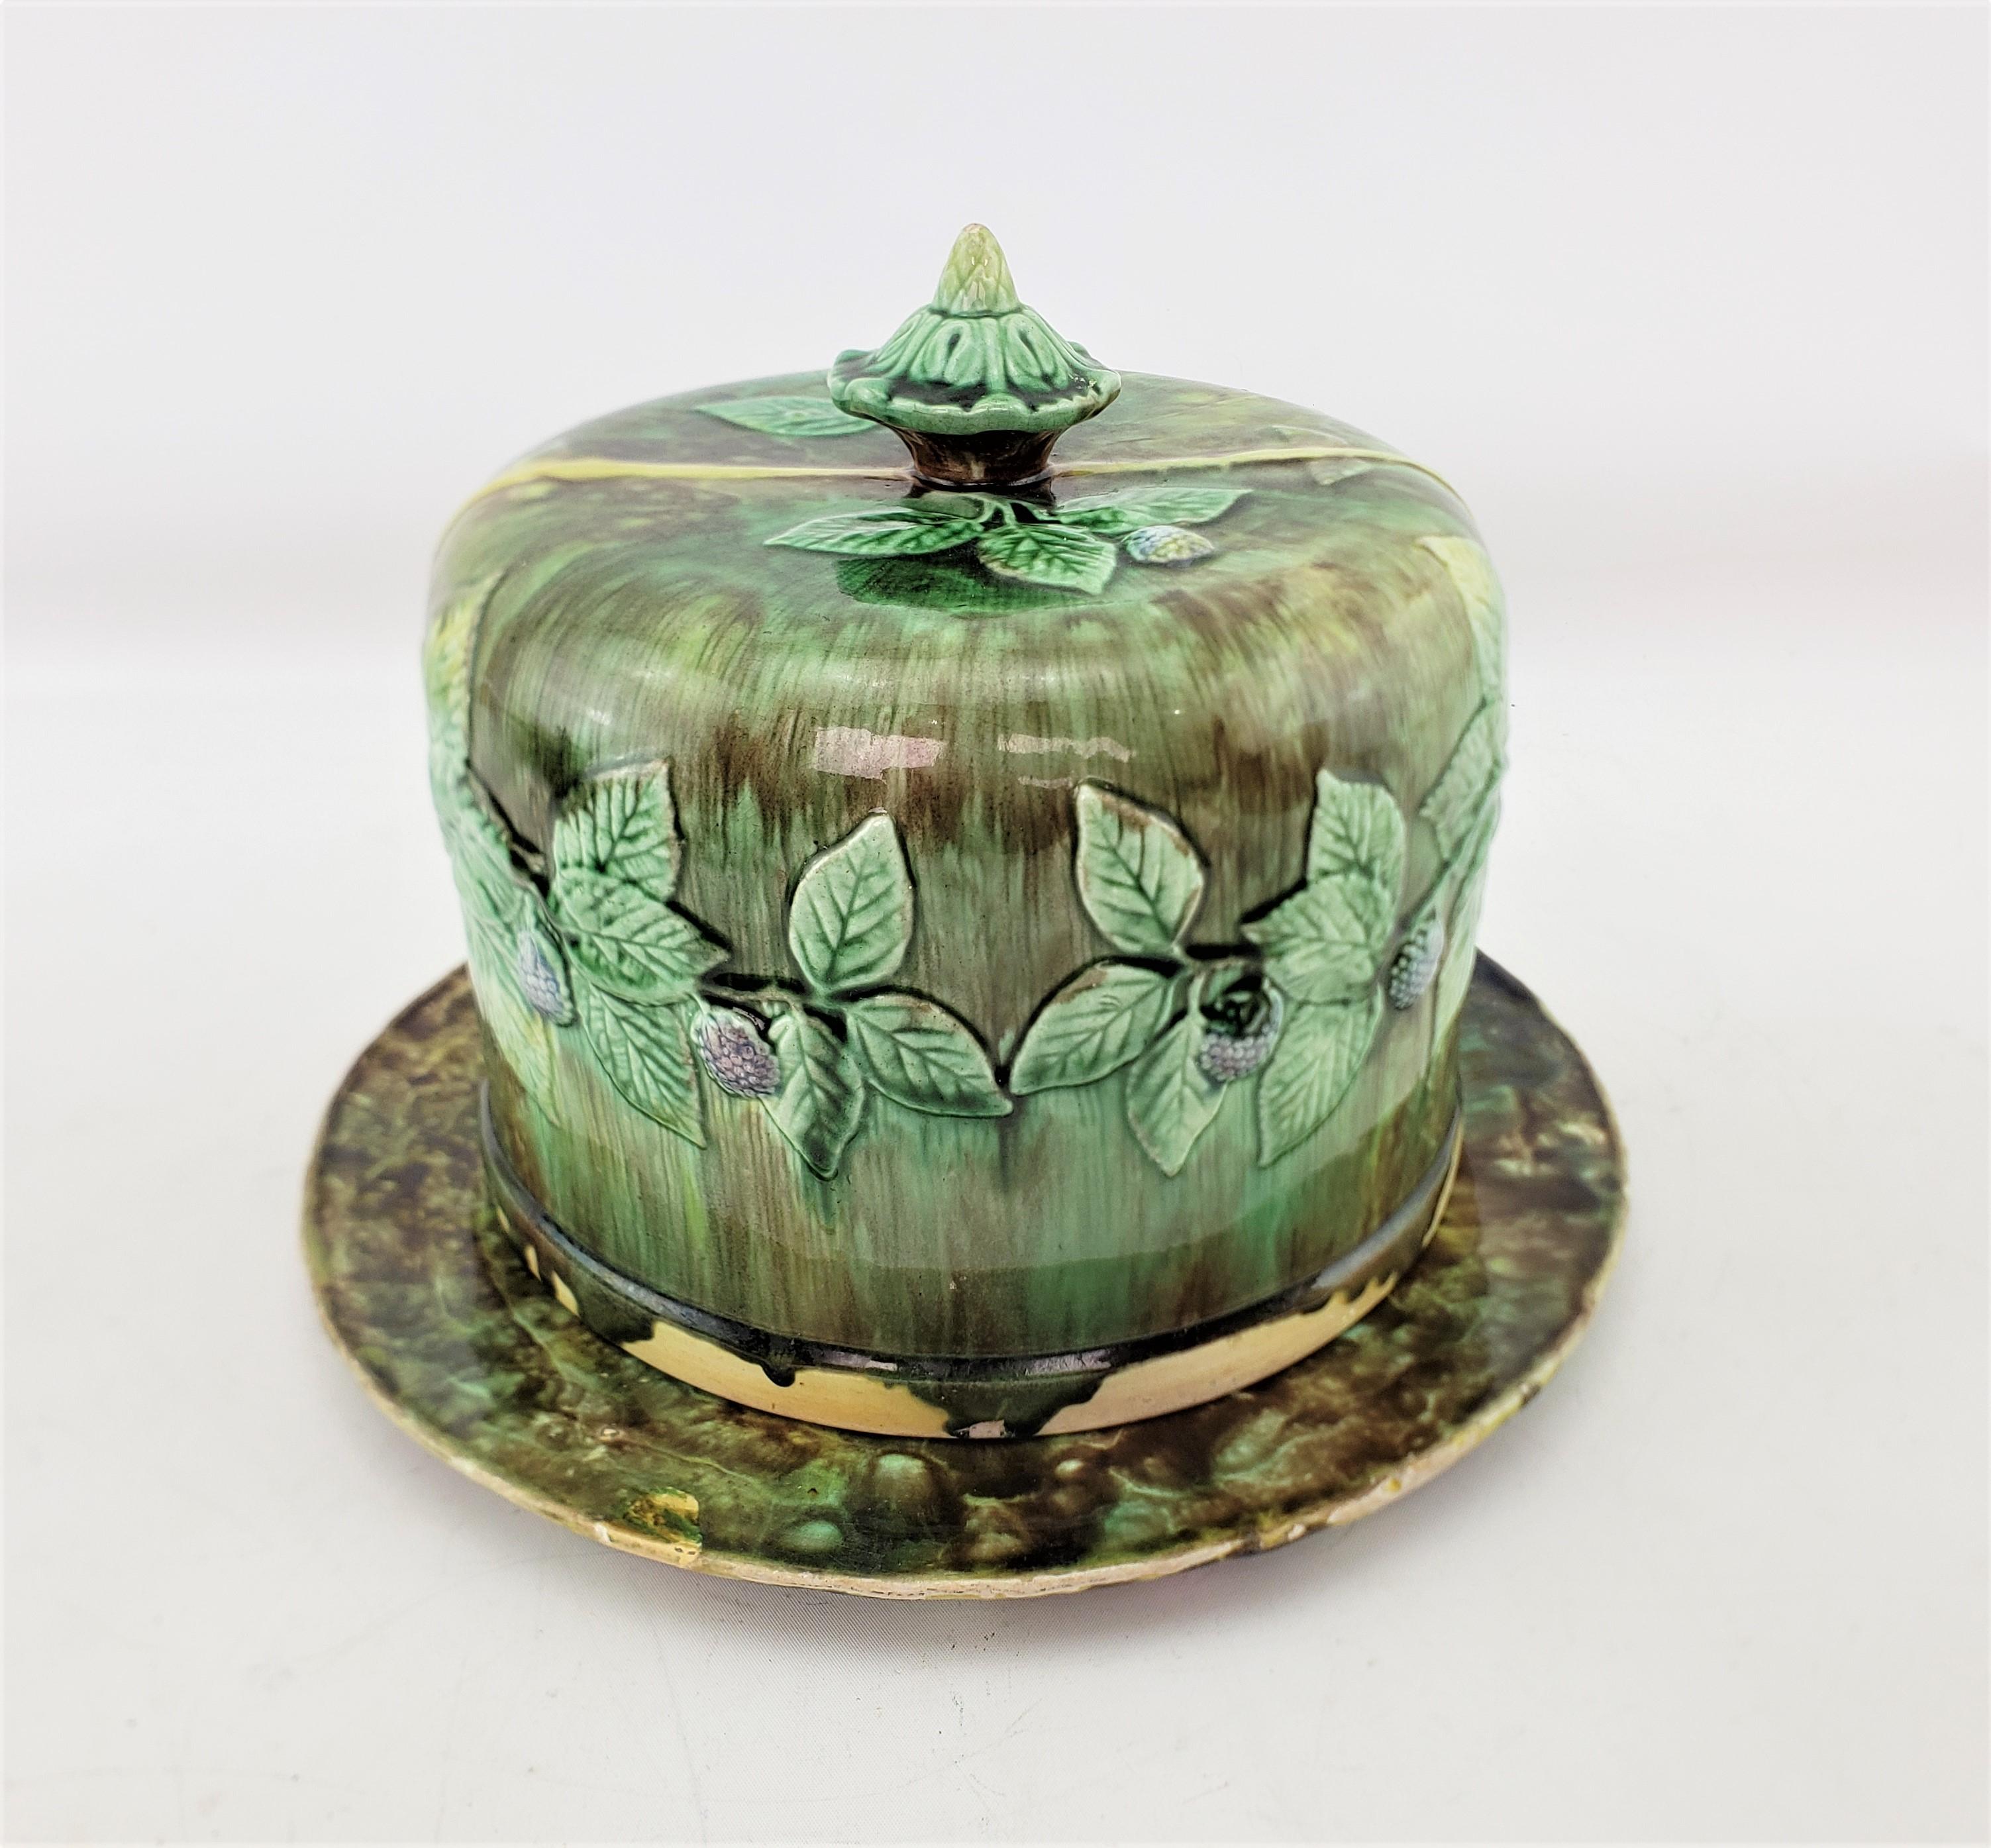 Ceramic Large Antique Majolica Covered Cheese Server or Dome with Leaf & Berry Decor For Sale